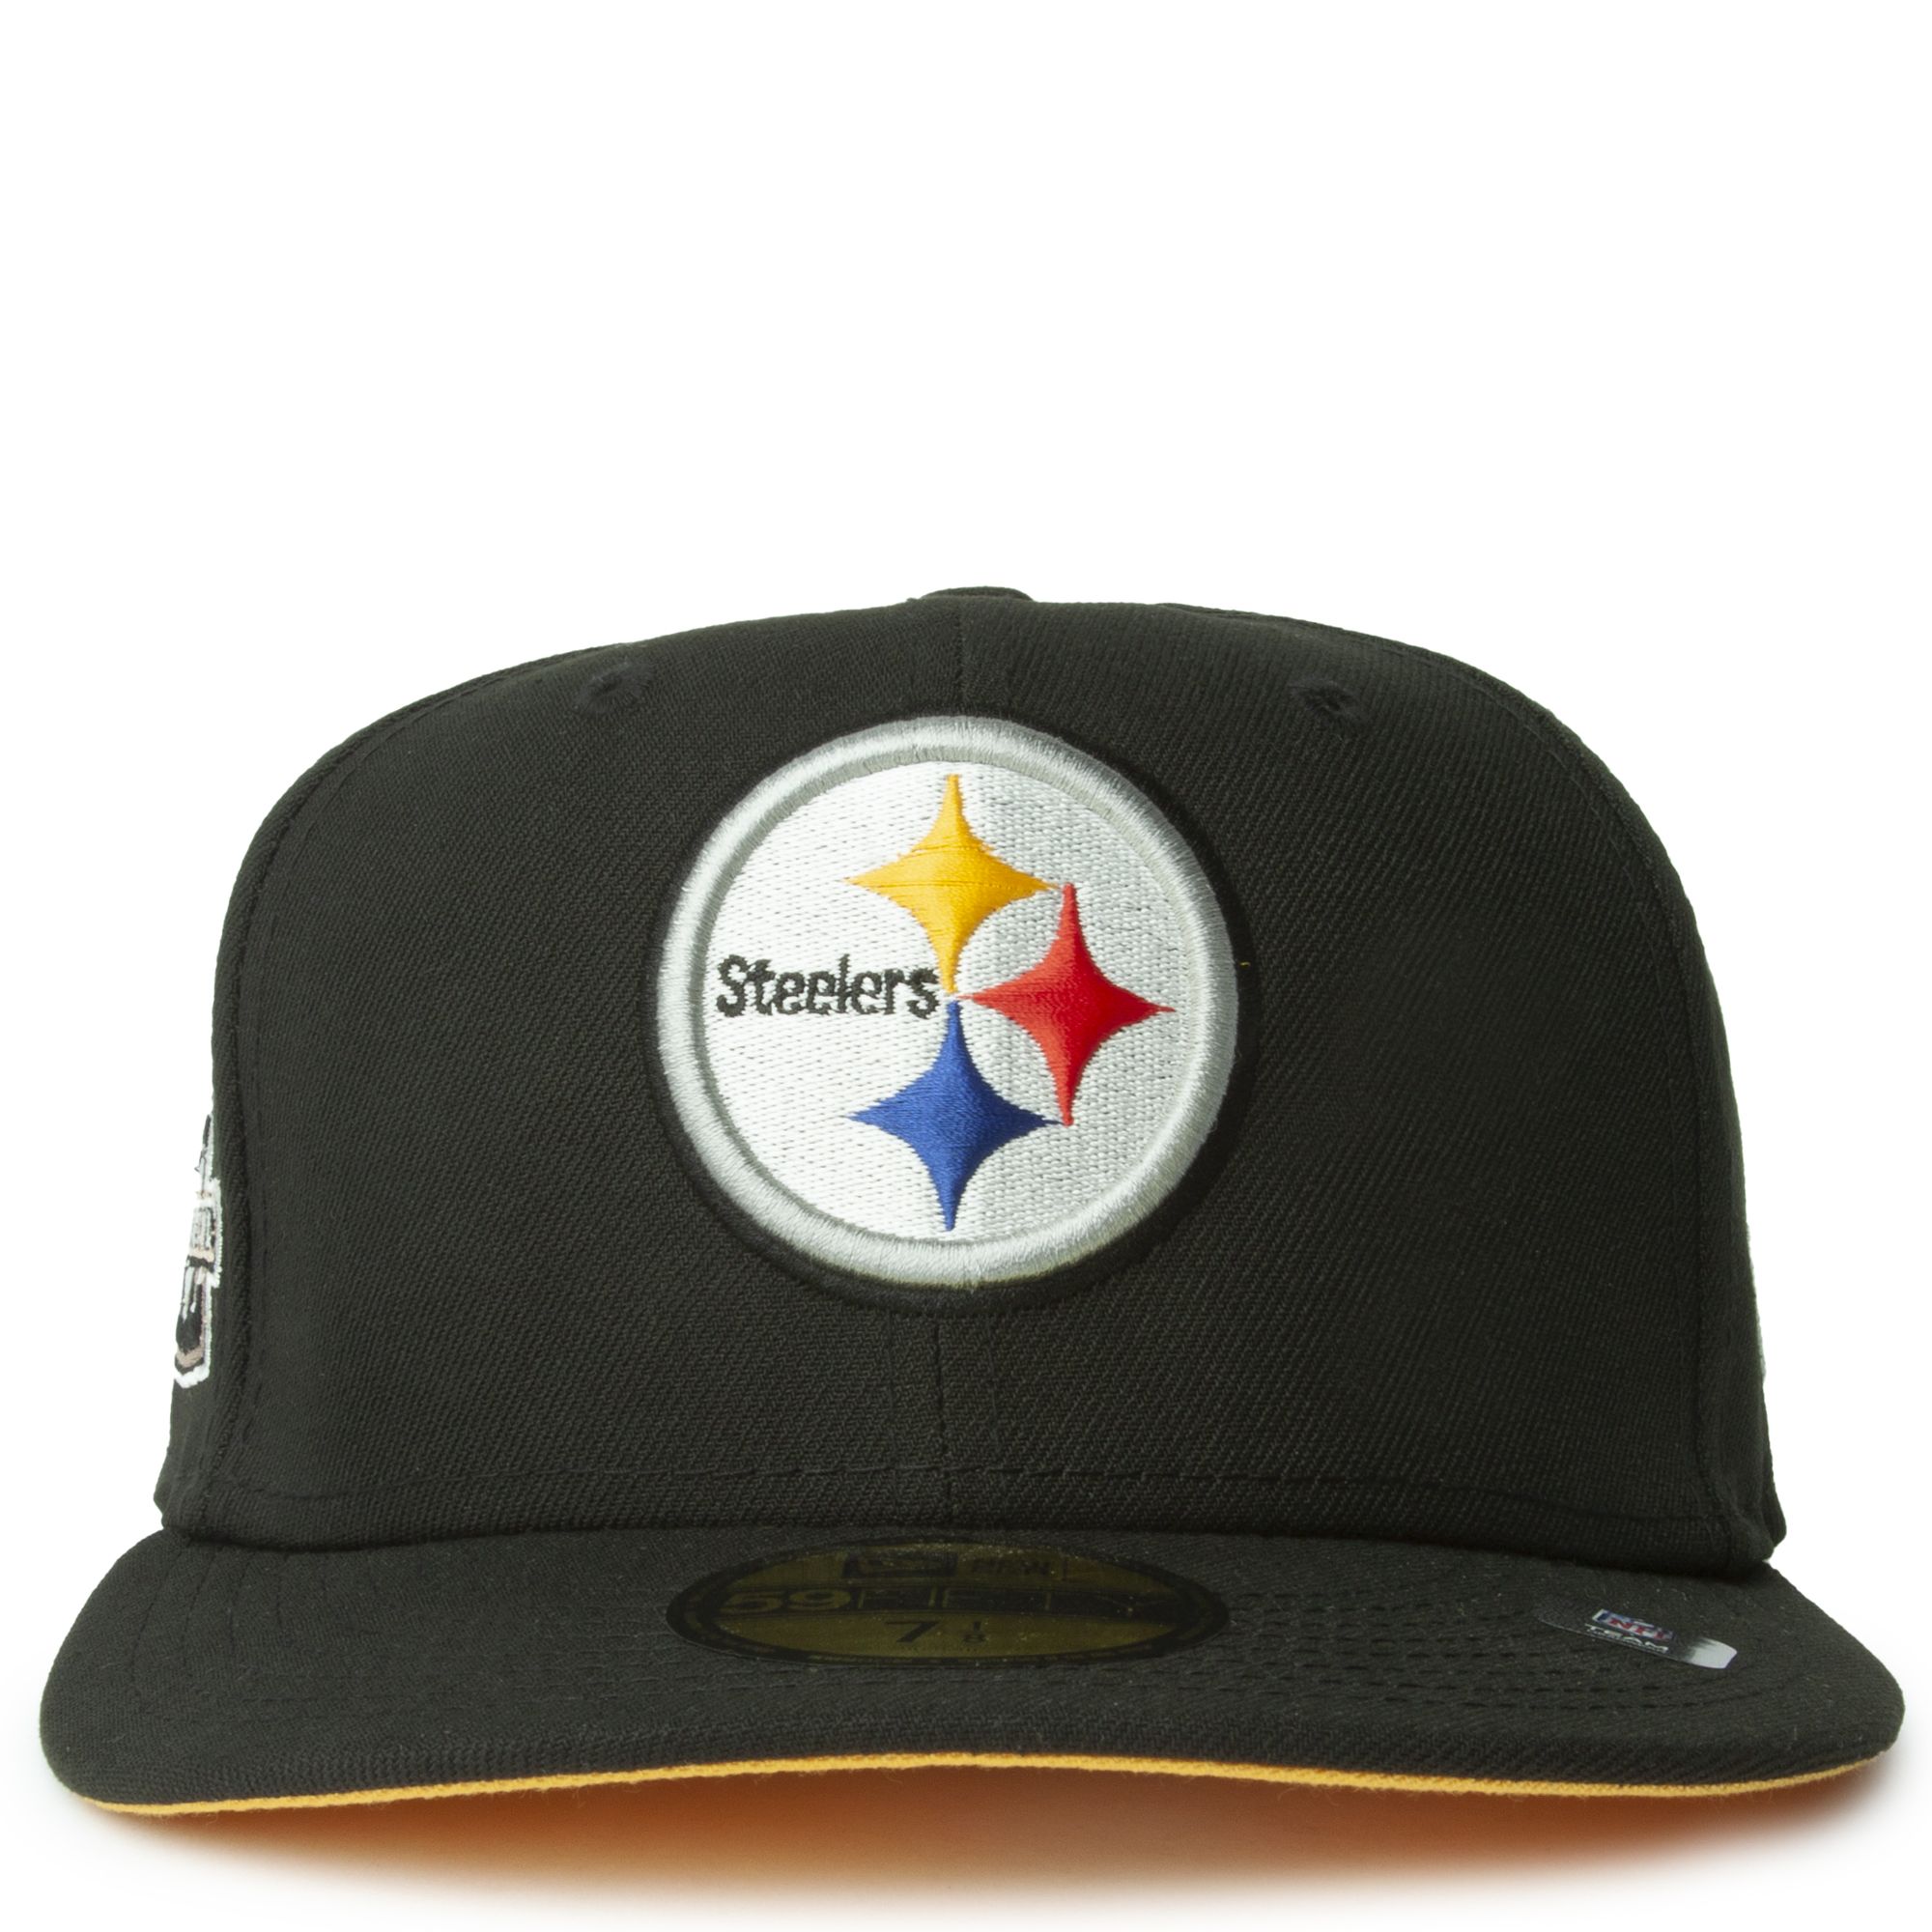 New Era Caps Pittsburg Steelers Black 59FIFTY Fitted Hat Black